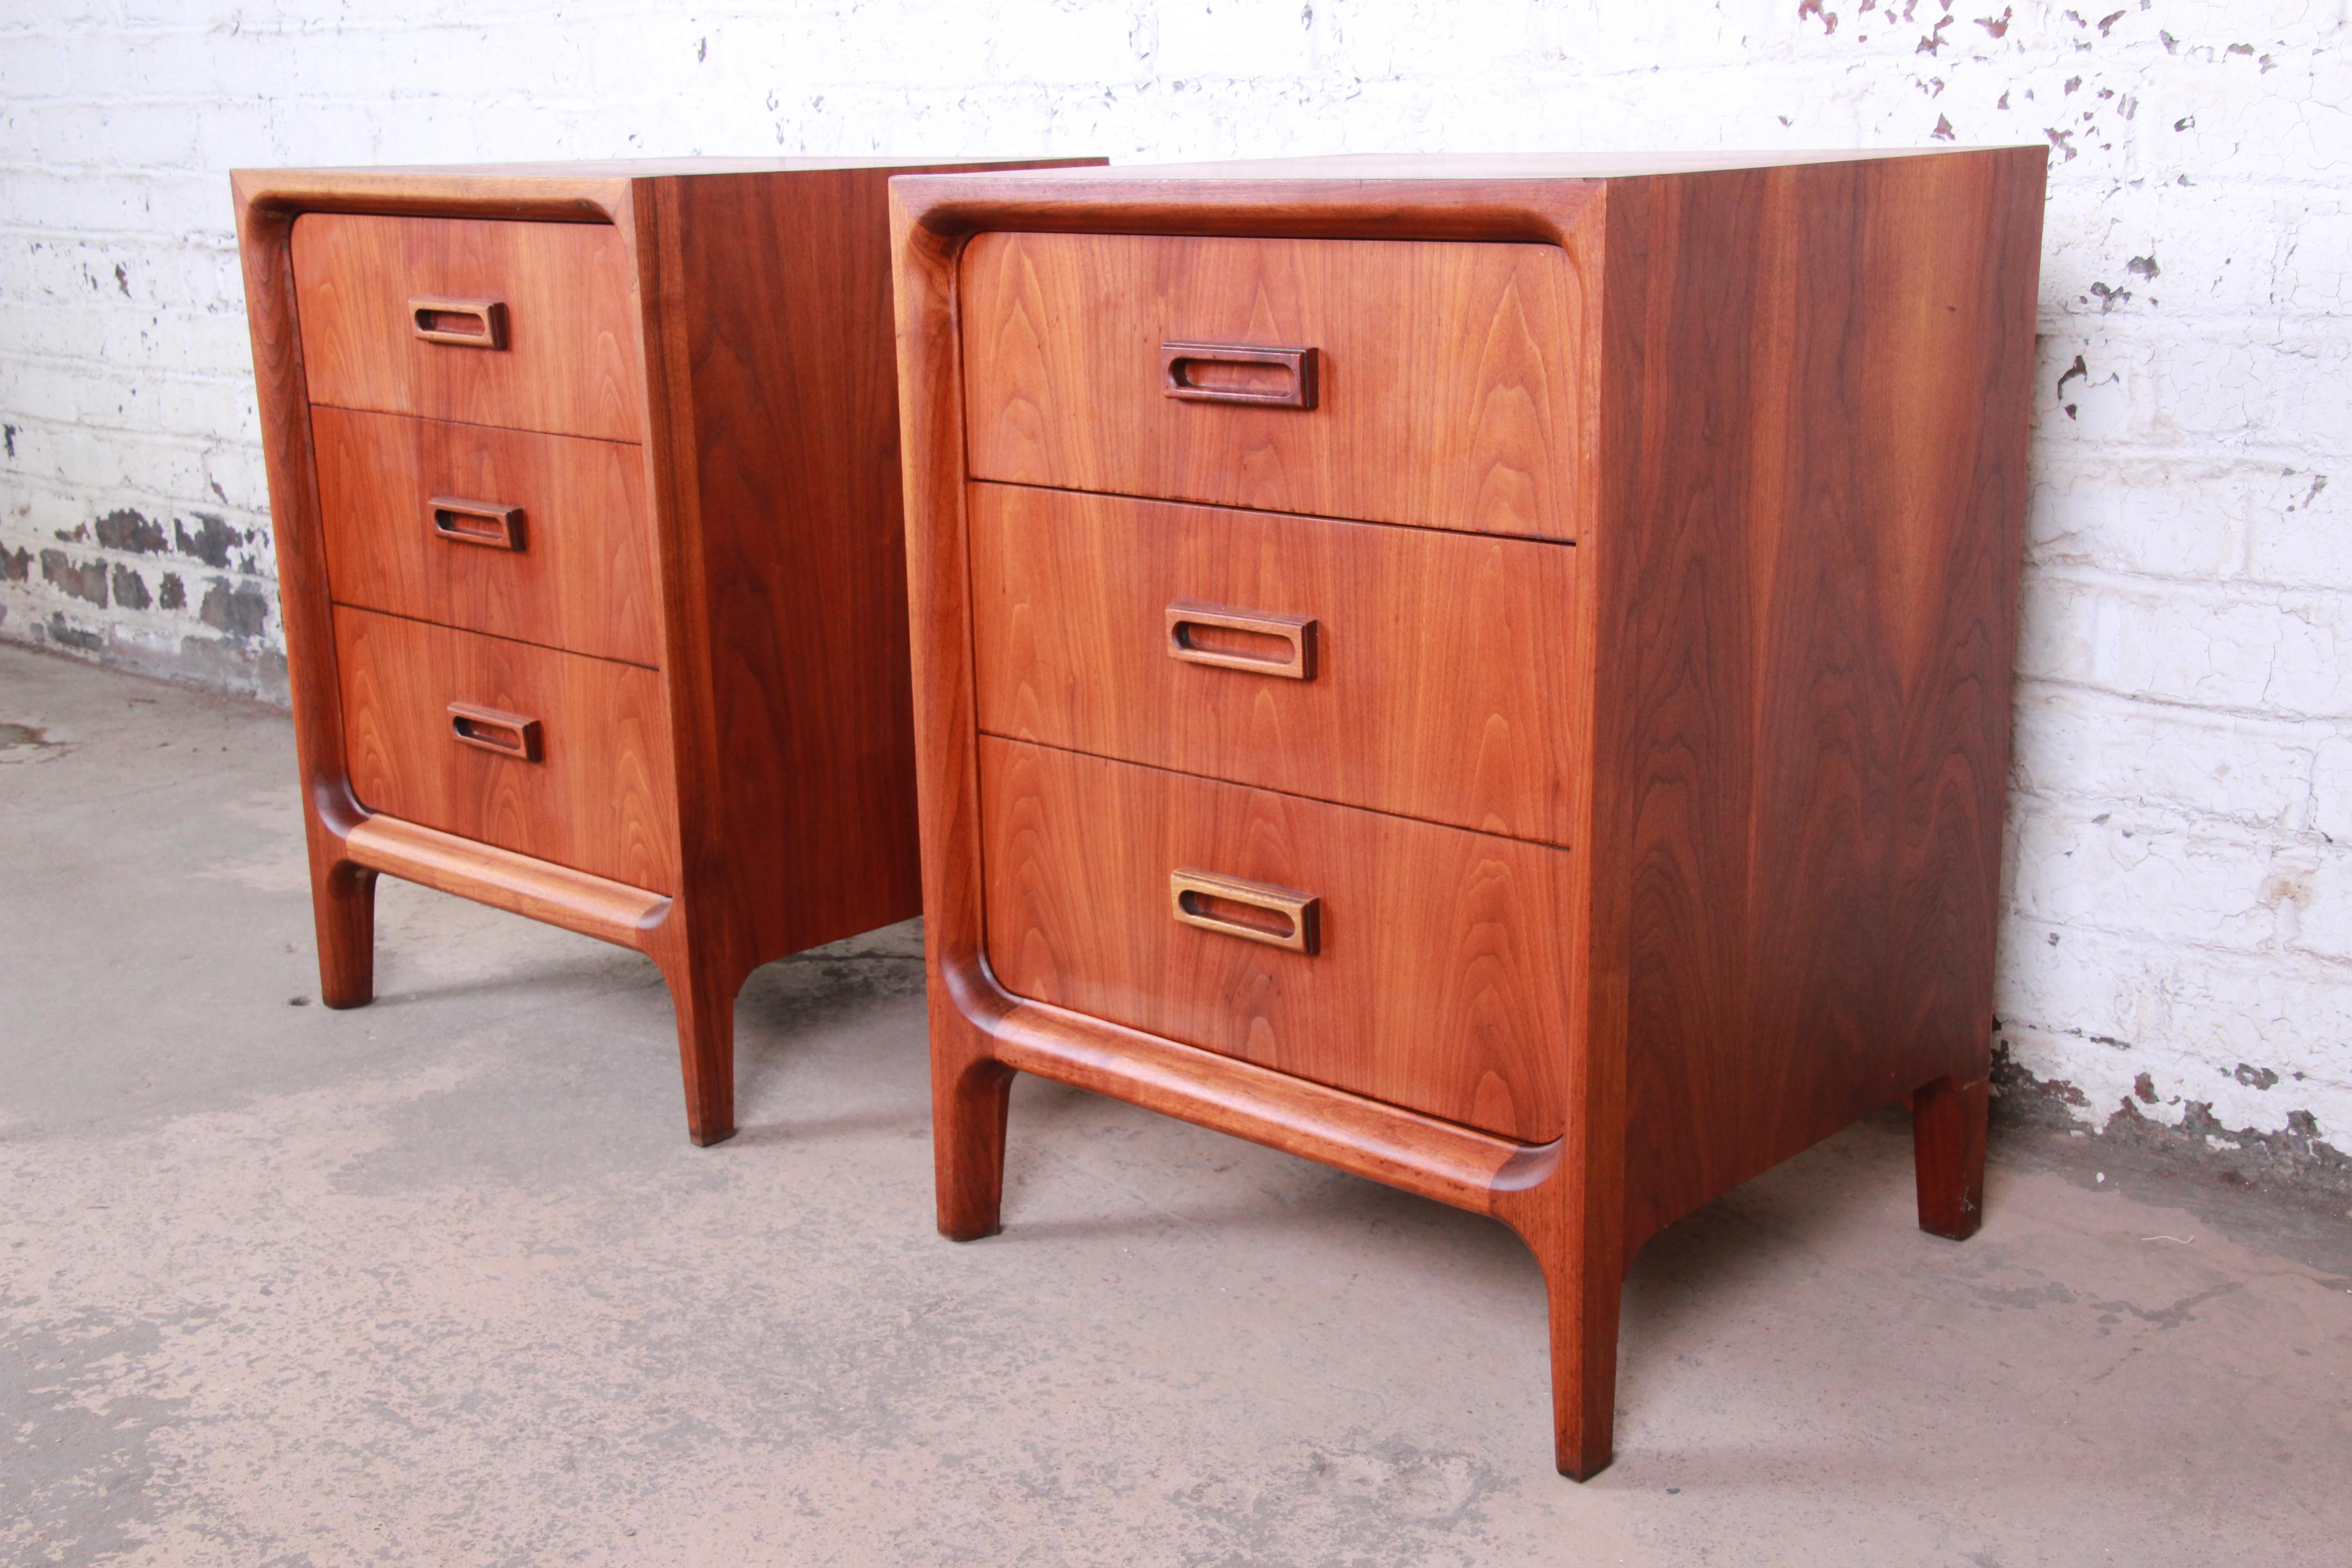 An exceptional pair of walnut three-drawer bachelor chests or nightstands by Widdicomb Furniture of Grand Rapids. The chests feature gorgeous walnut wood grain and sleek mid-century design. They offer ample storage, each with three deep dovetailed